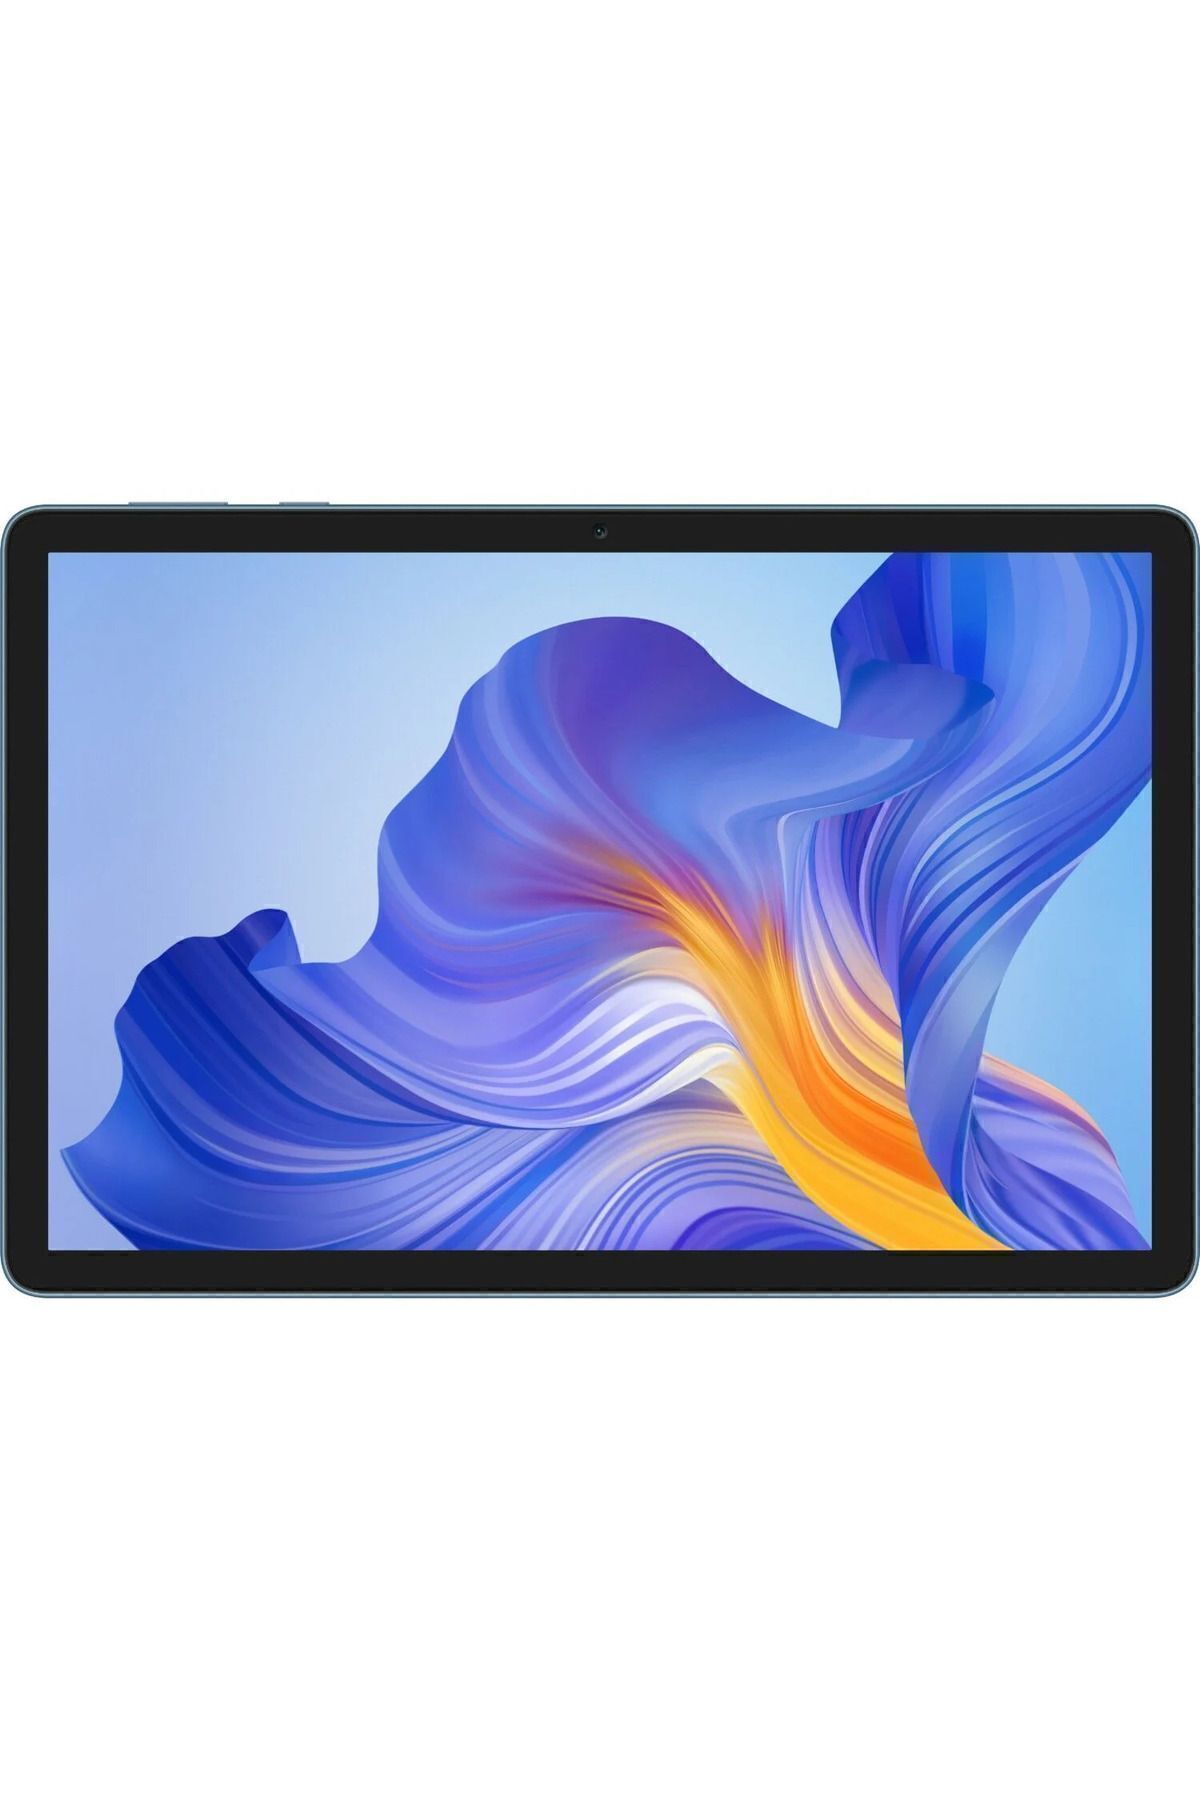 Honor Pad X8 2Ghz 4Gb 64Gb 10.1''-Android Tablet